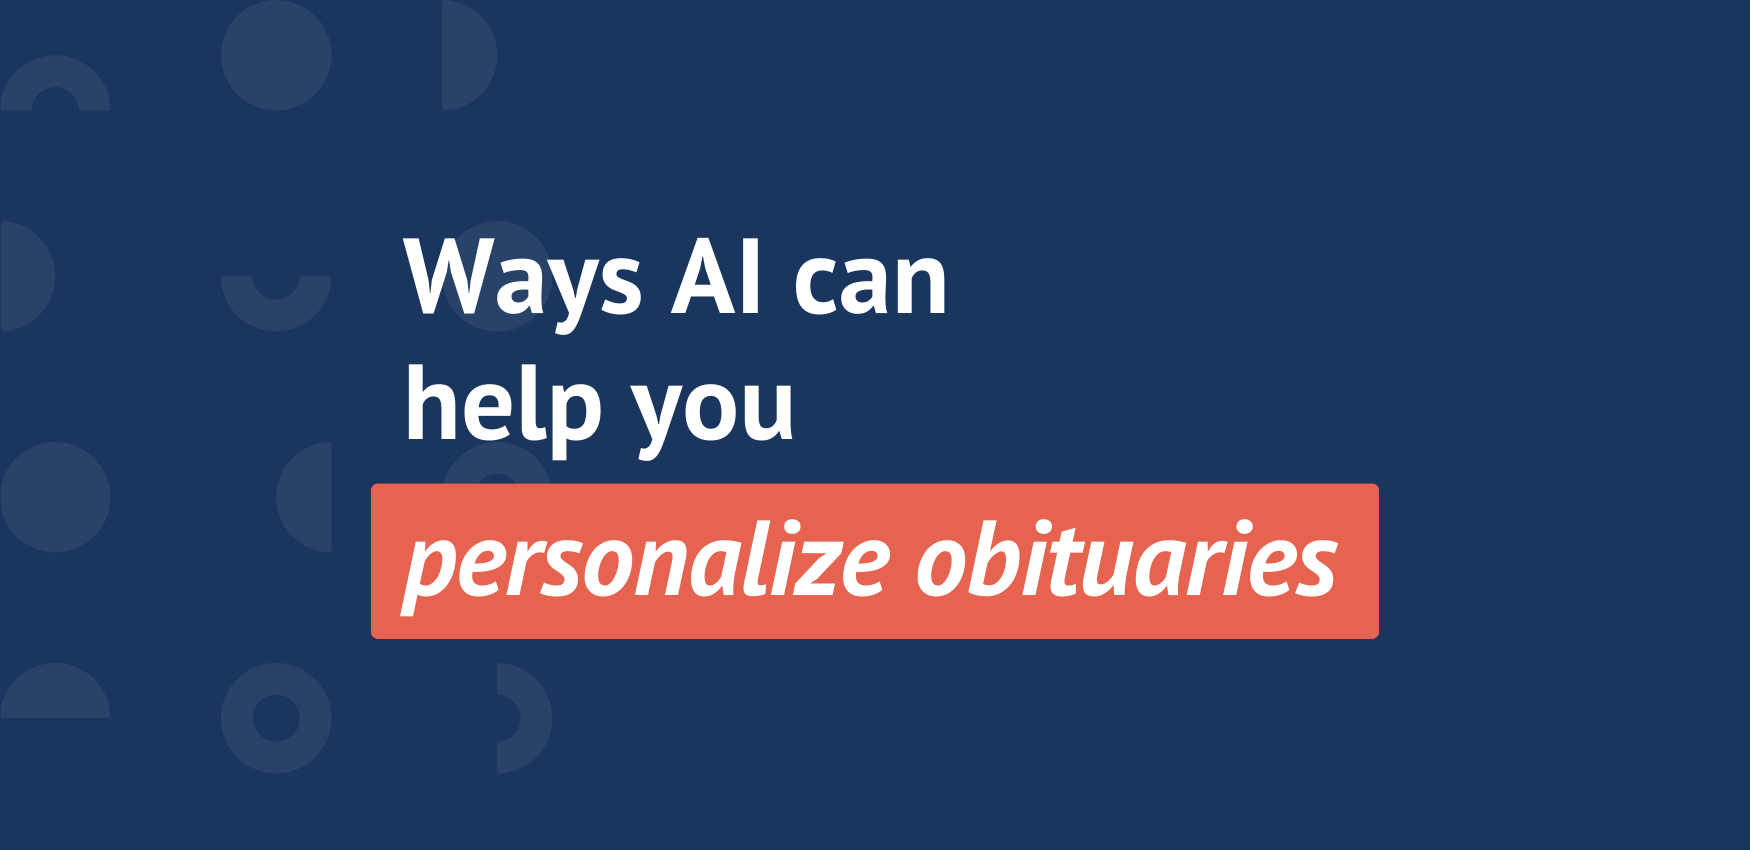 5 Ways AI Can Help You Personalize Obituaries for Families